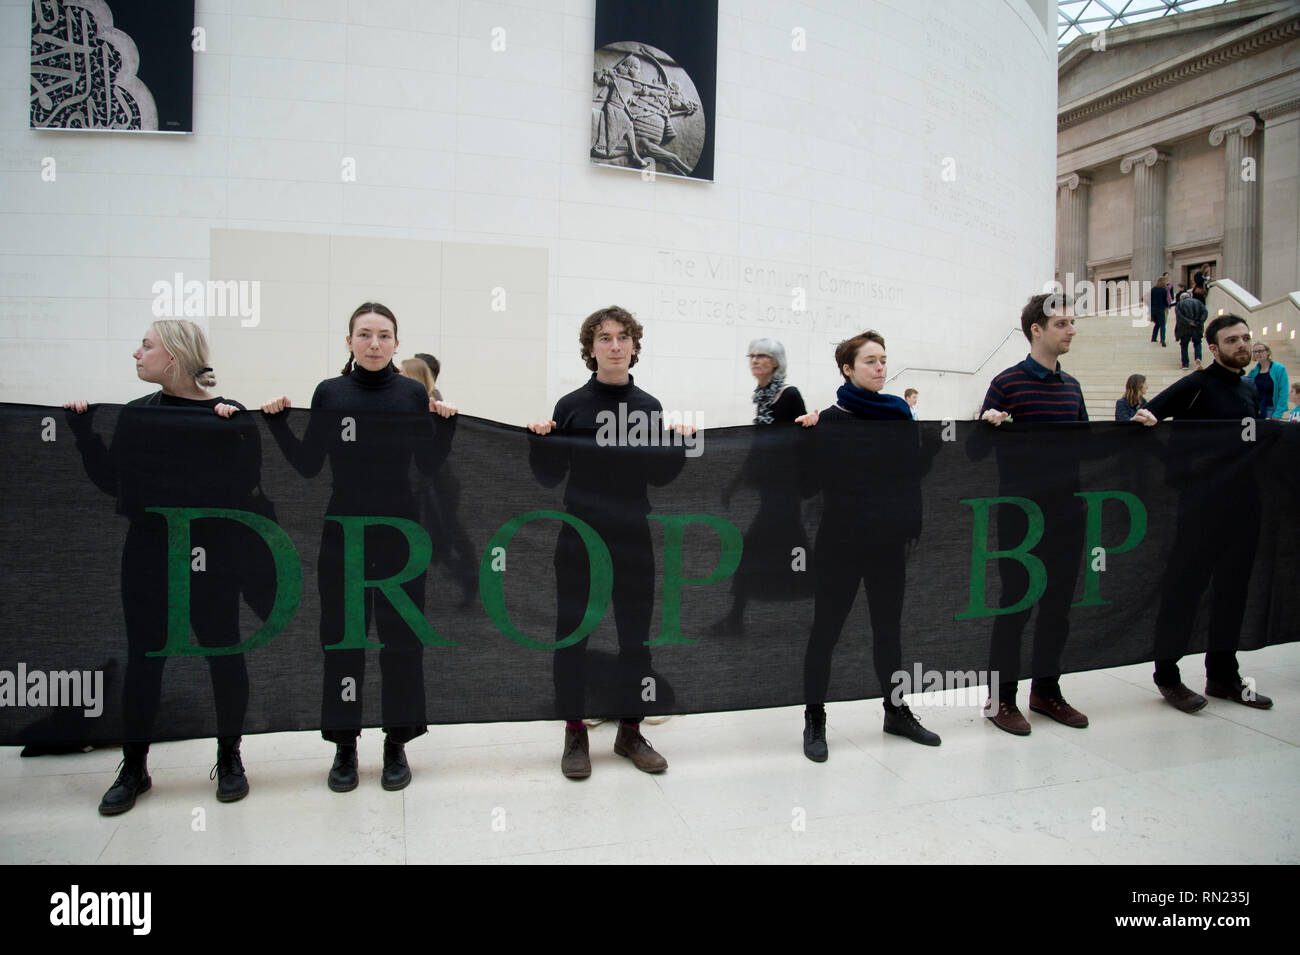 British Museum, London February 16th 2019. Over 300 people staged a creative takeover of the Great Court protesting at BP sponsorship of the current major exhibition 'I am Ashurbanipal' which features artifacts which were removed from present day Iraq during the Ottoman Empire. BP lobbied the UK government to gain access to Iraq’s oil reserves before the 2003 Iraq war. Stock Photo